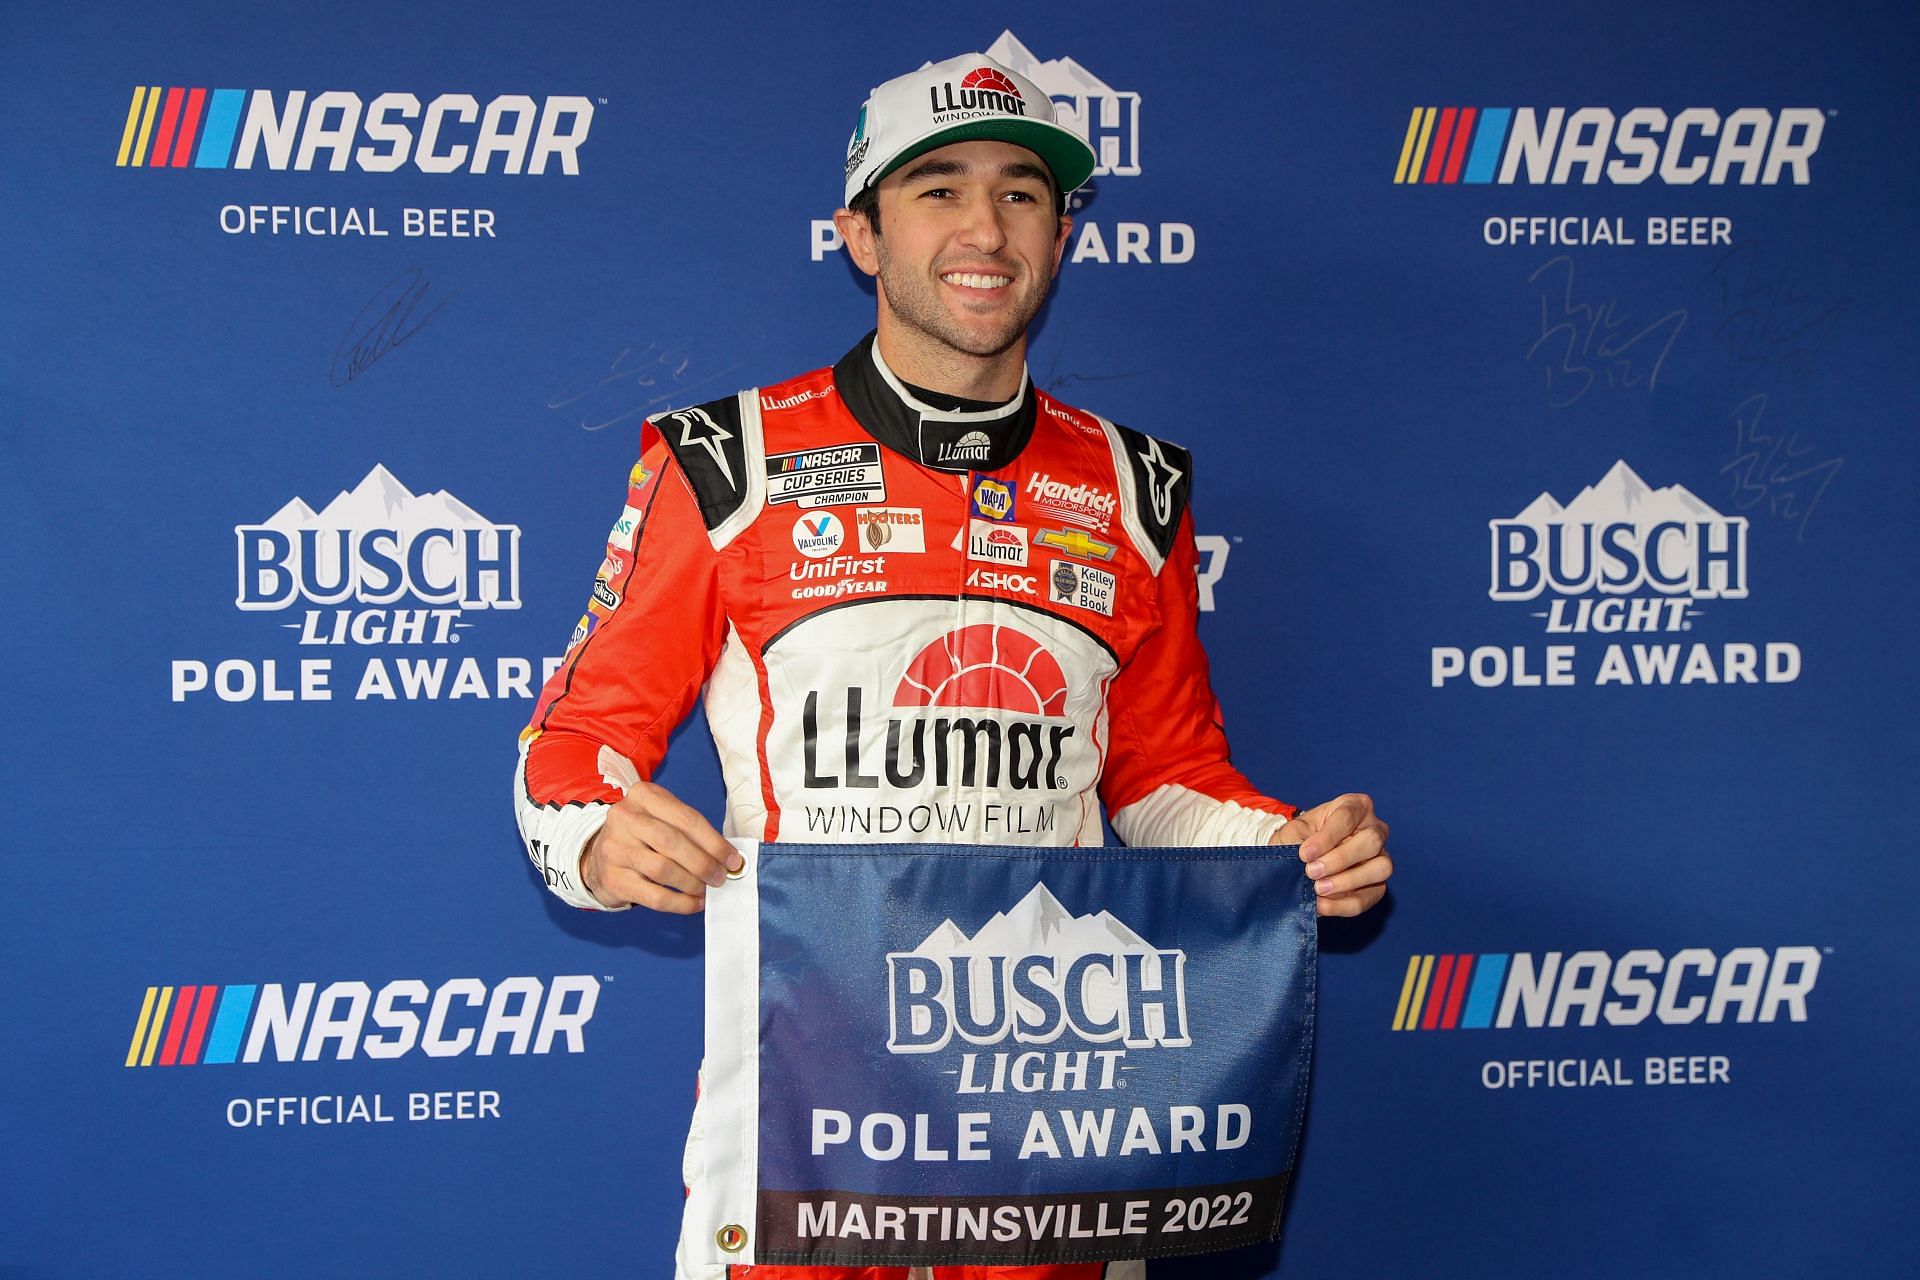 Chase Elliott poses for photos after winning the pole award during qualifying for the NASCAR Cup Series Blue-Emu Maximum Pain Relief 400 at Martinsville Speedway.